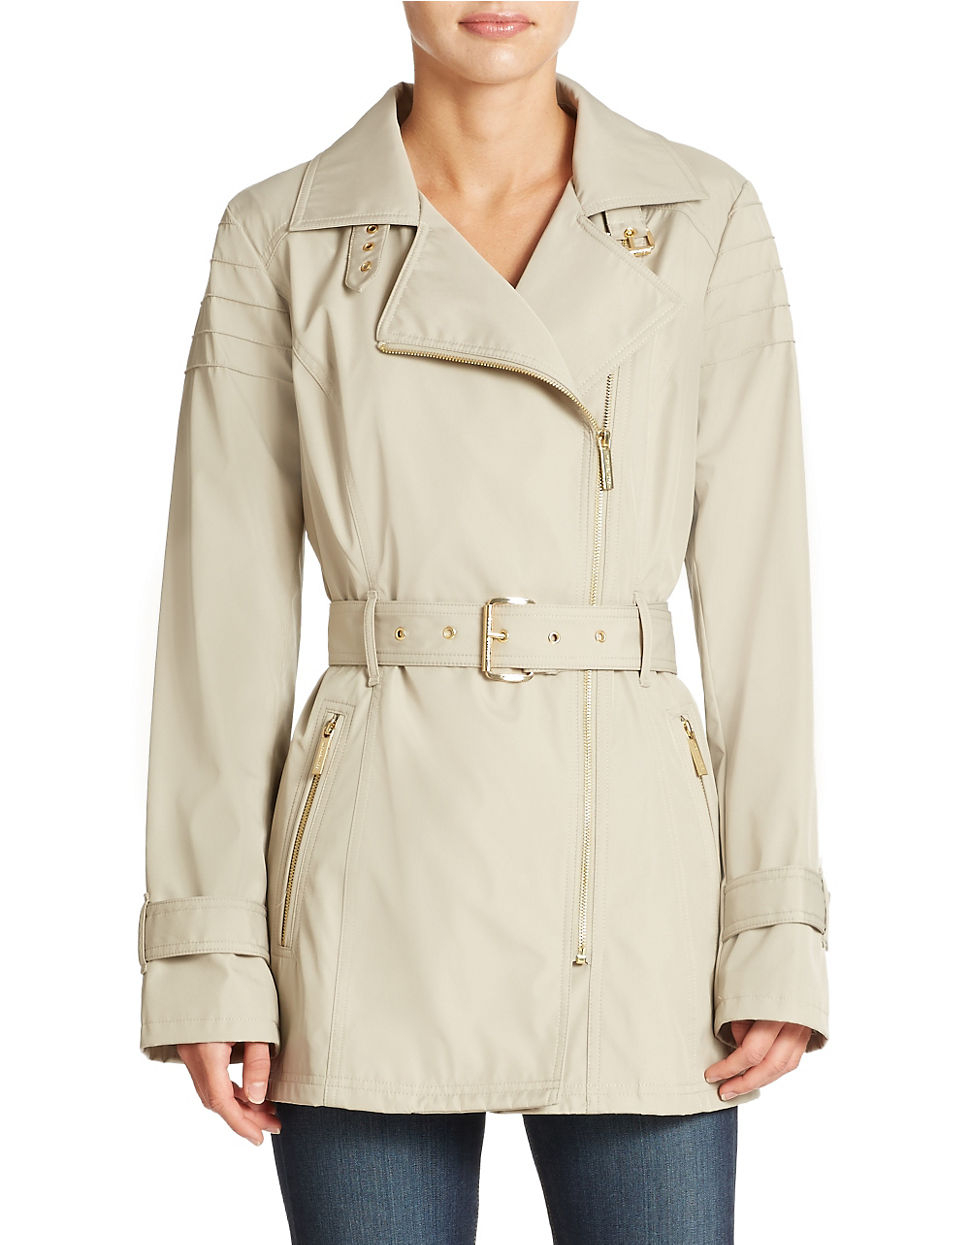 Lyst - Michael Kors Asymmetrical Belted Trench Coat in Natural